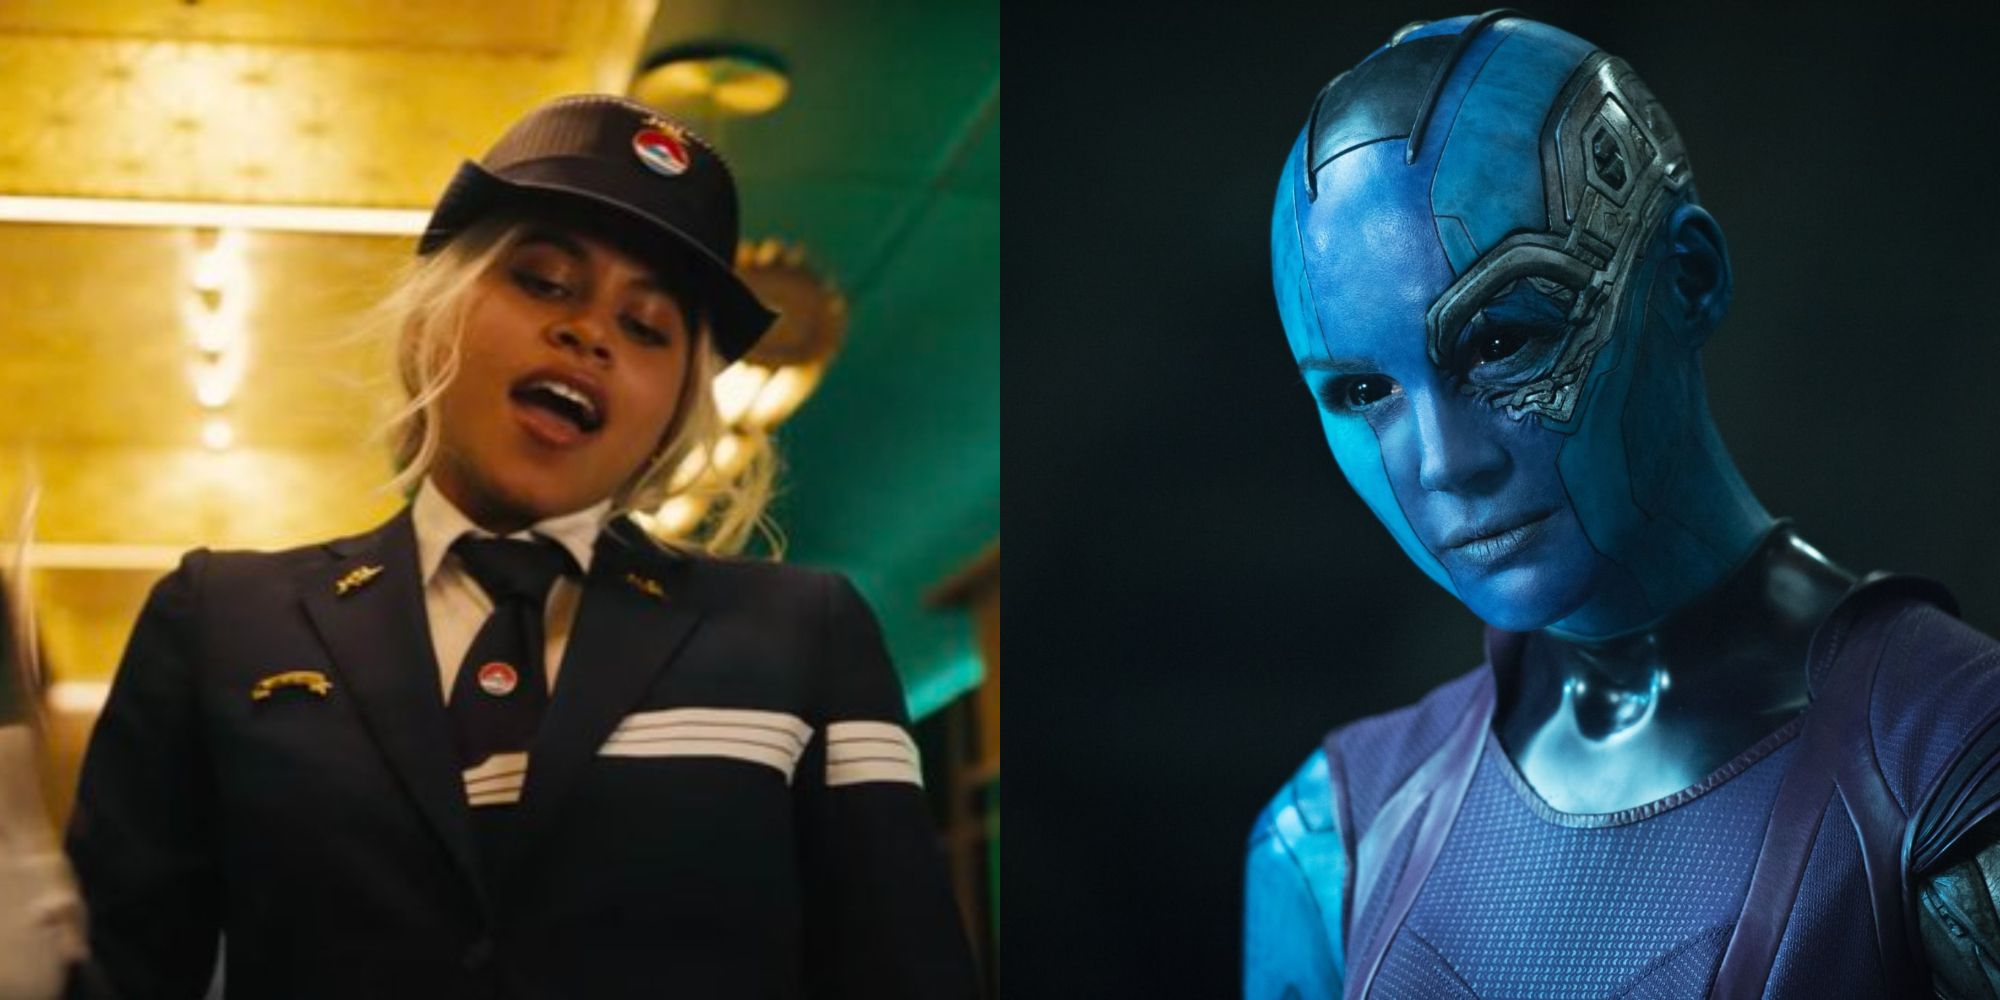 Split images of Hornet laughing in Bullet Train and Nebula smiling in Guardians of the Galaxy